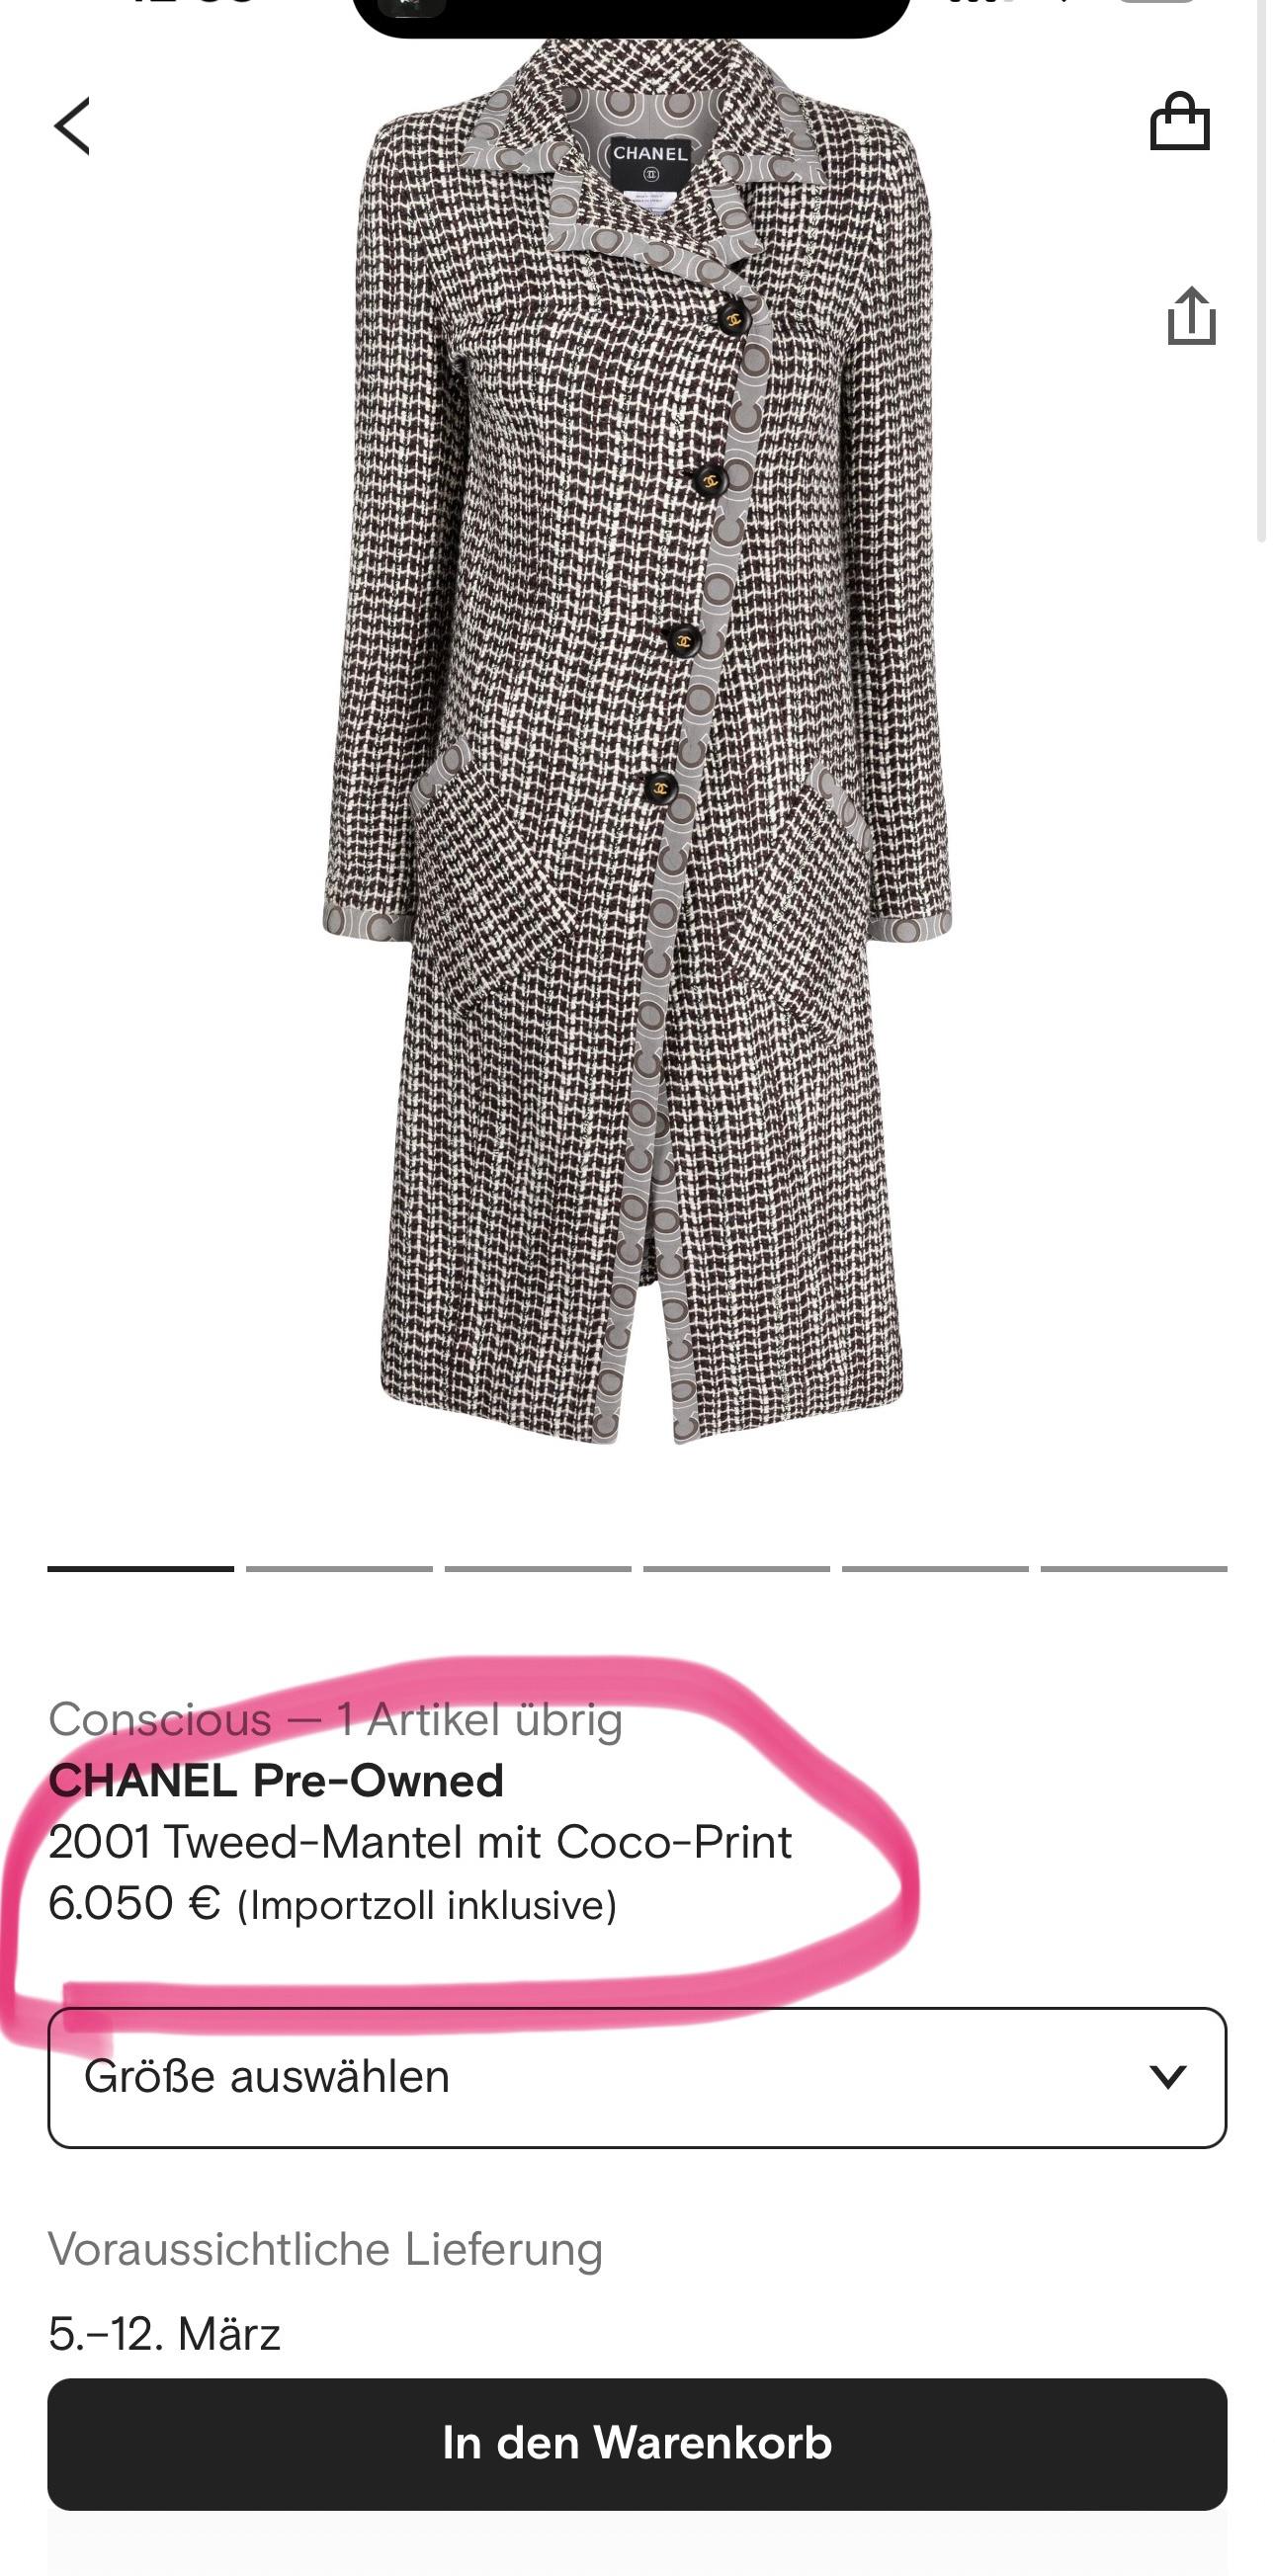 Price on same coat on far-fetch is over 6,000€ (pre-owned)
- Super rare, collectors Chanel tweed coat with COCO Logo trim throughout -- from 2001 Fall Collection by Karl Lagerfeld.
Size mark 36 FR. Pristine condition.